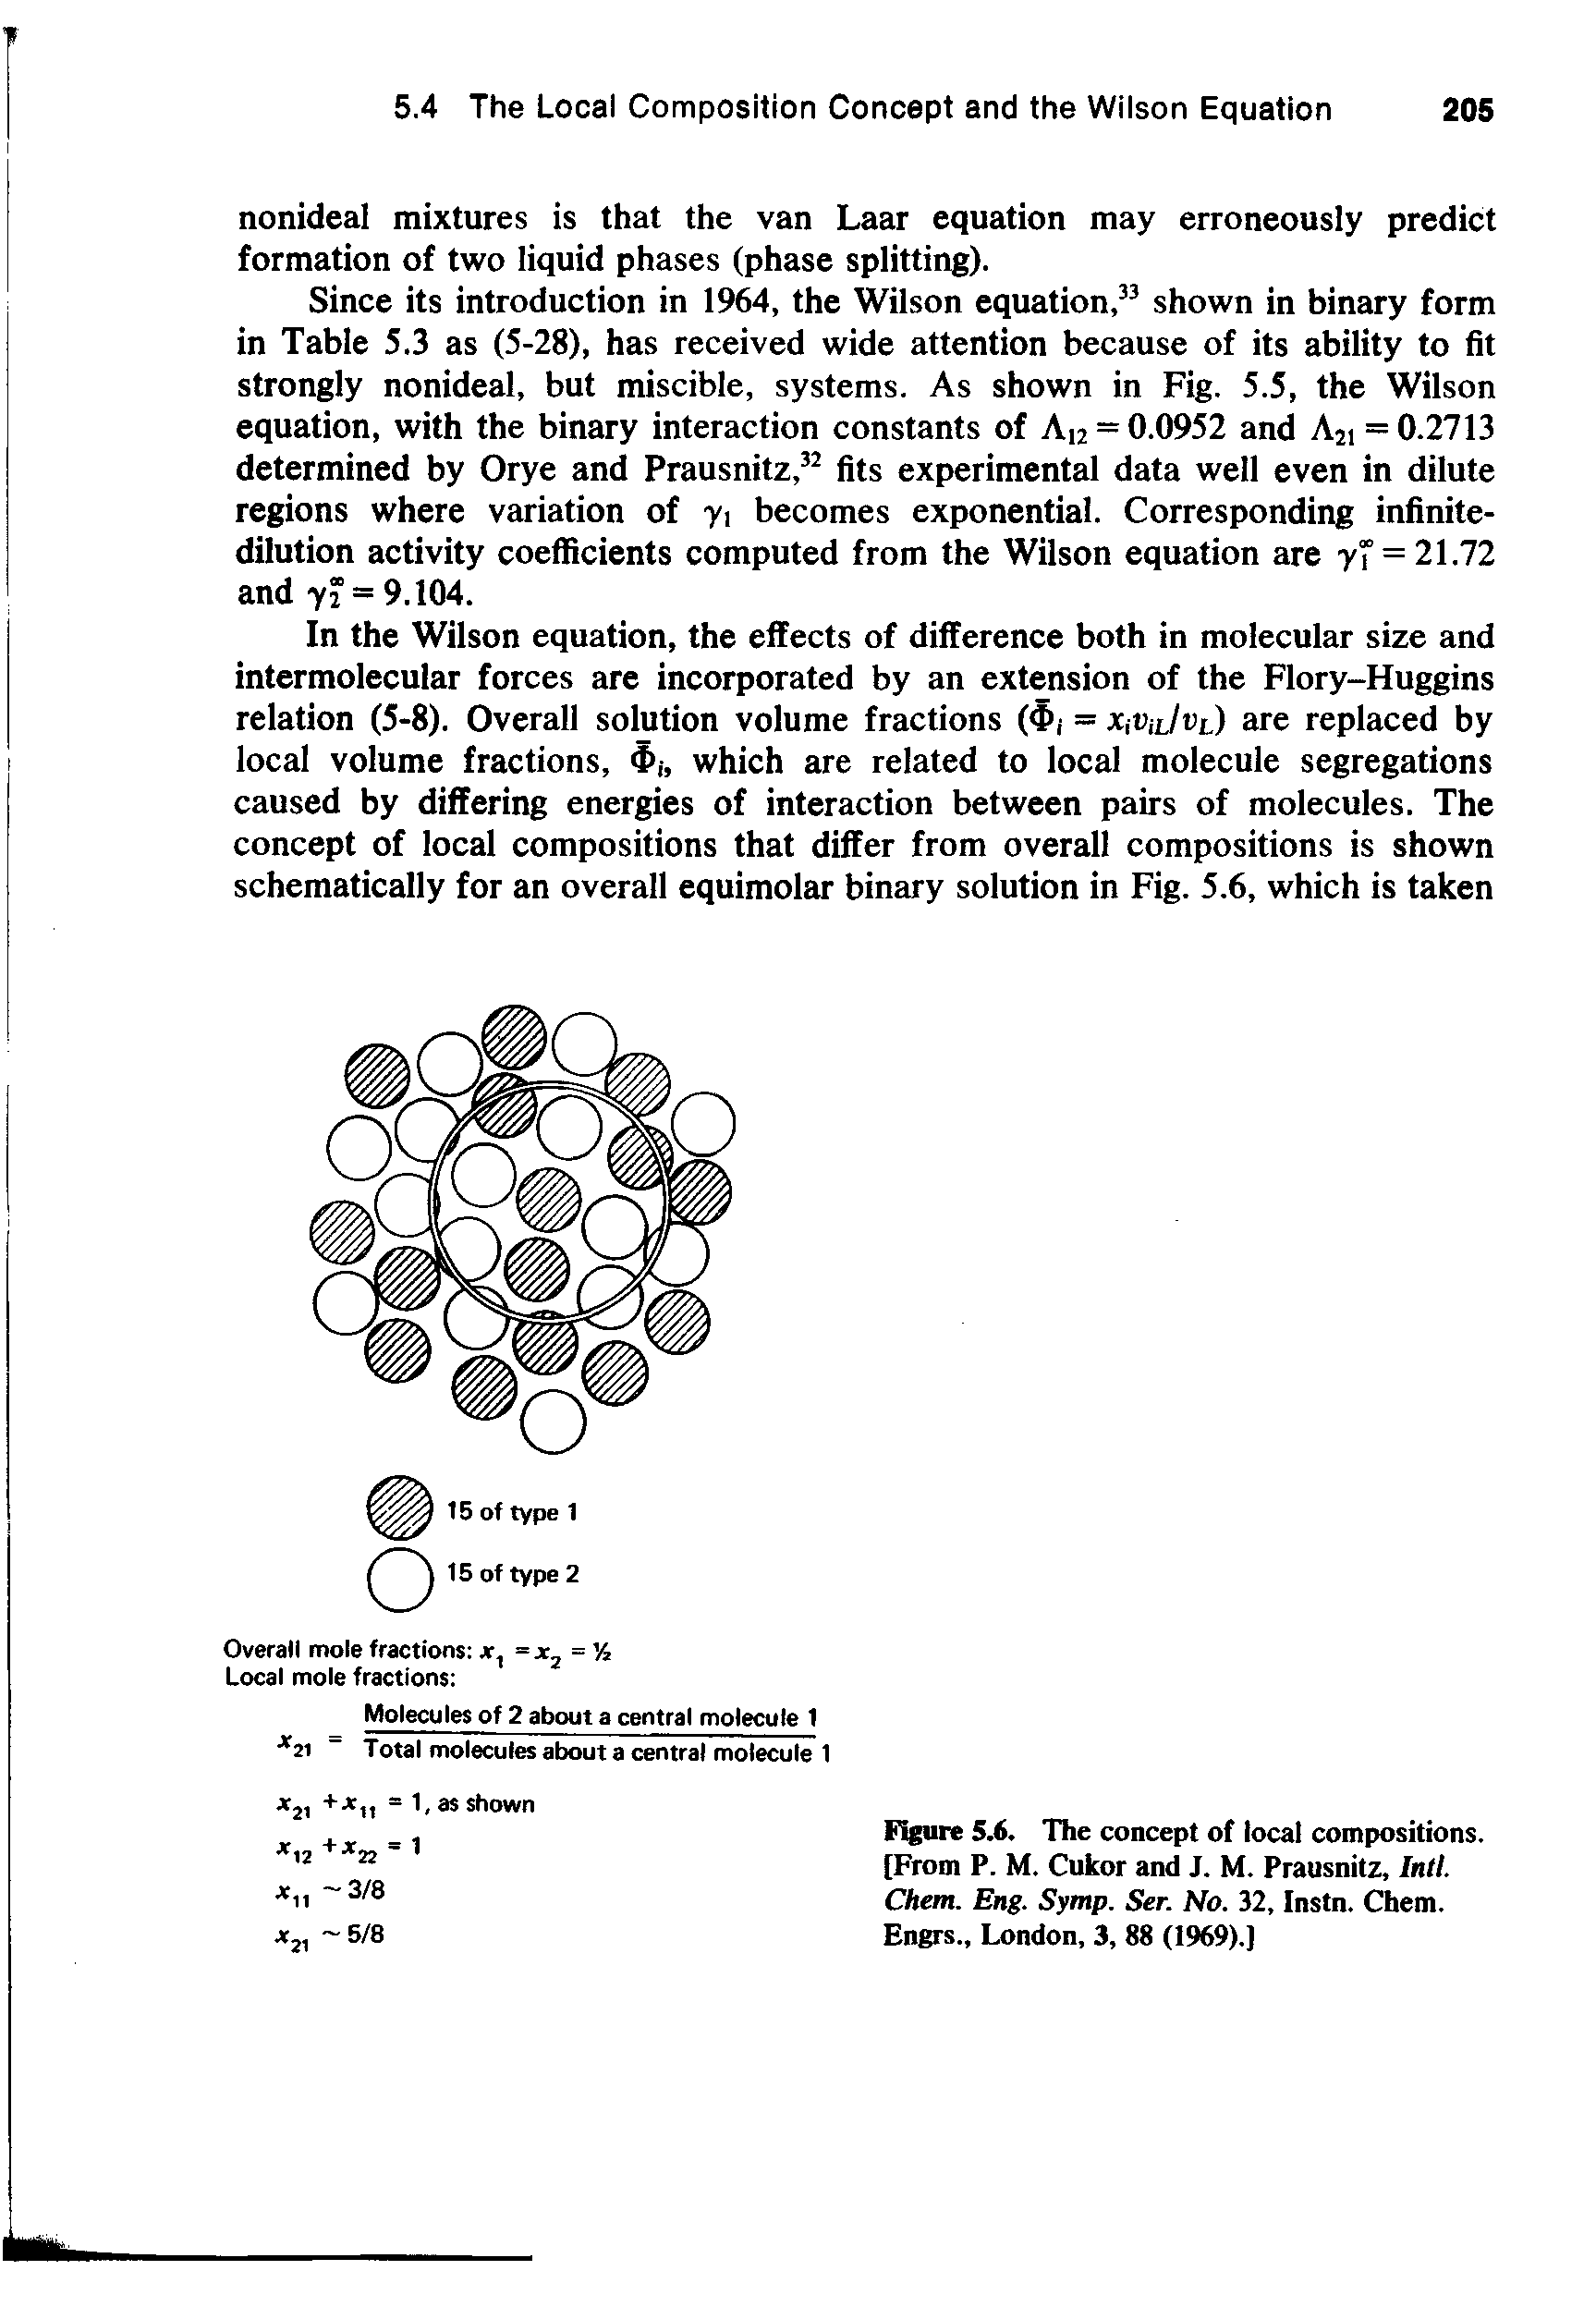 Figure 5.6. The concept of local compositions. [From P. M. Cukor and J. M. Prausnitz, bill. Chetn. Eng. Symp. Ser. No. 32, Instn. Chem. Engrs., London, 3, 88 (1969).]...